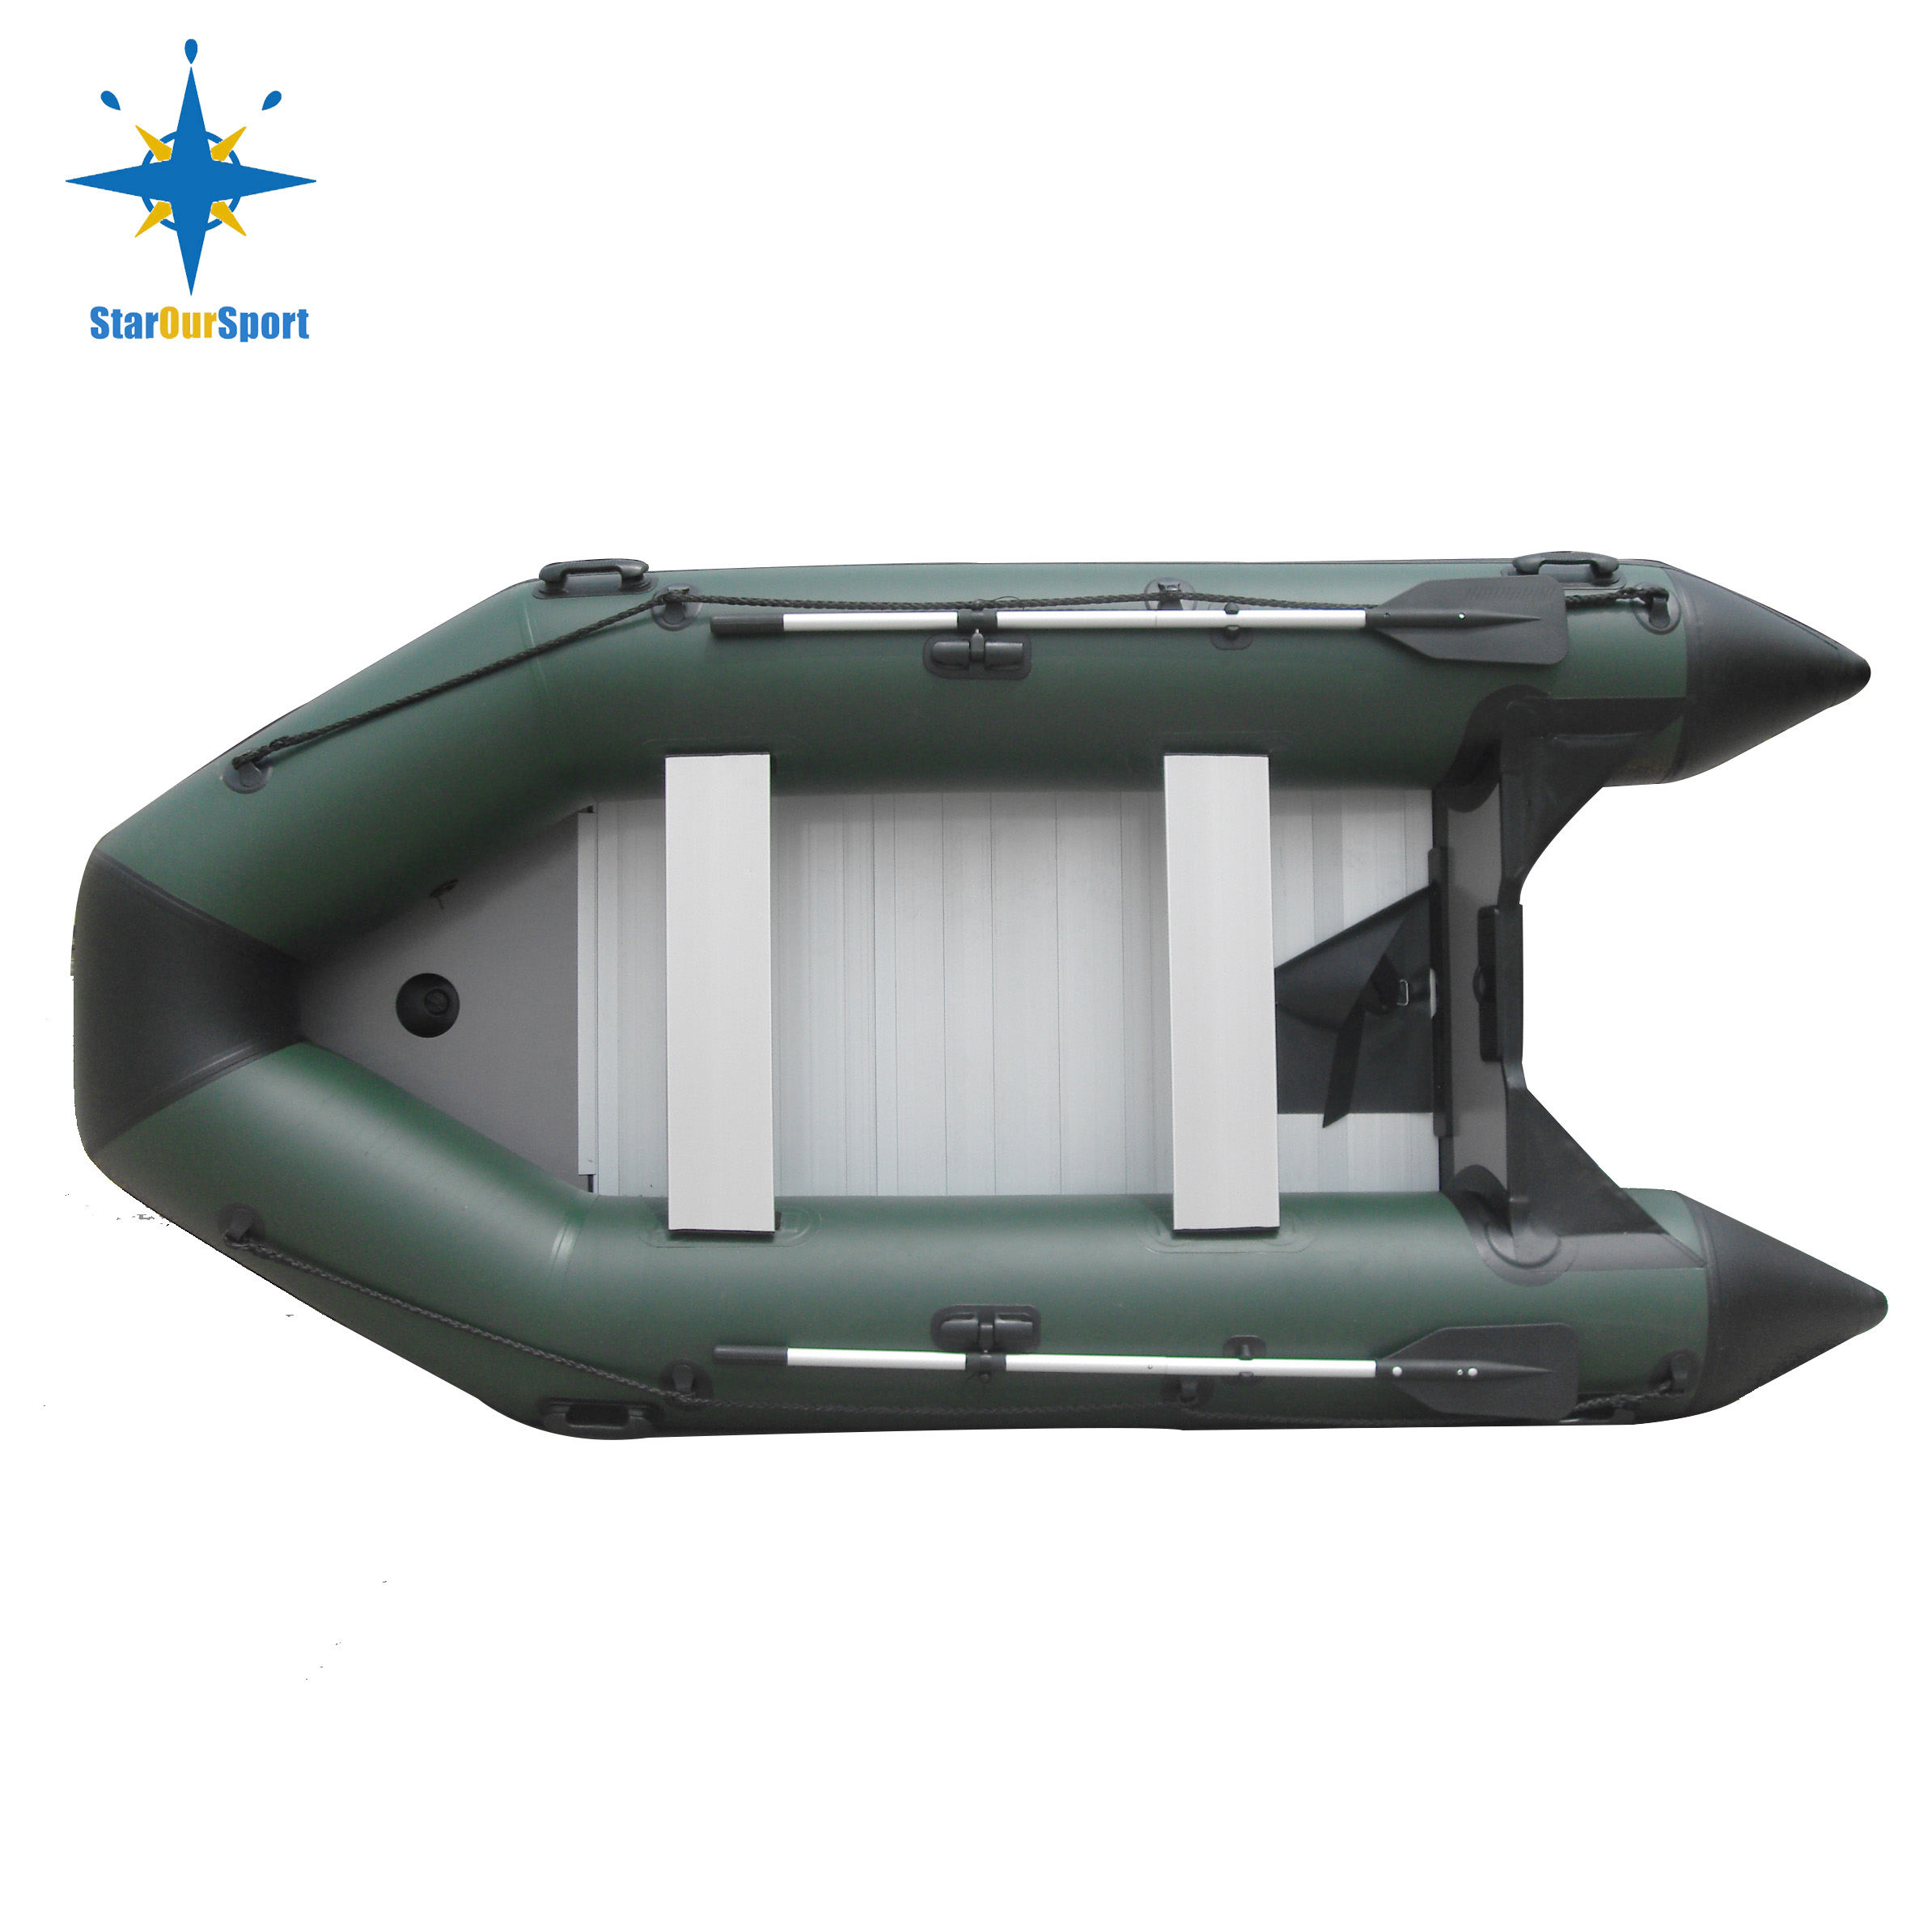 Inflatable boat materials and accessories